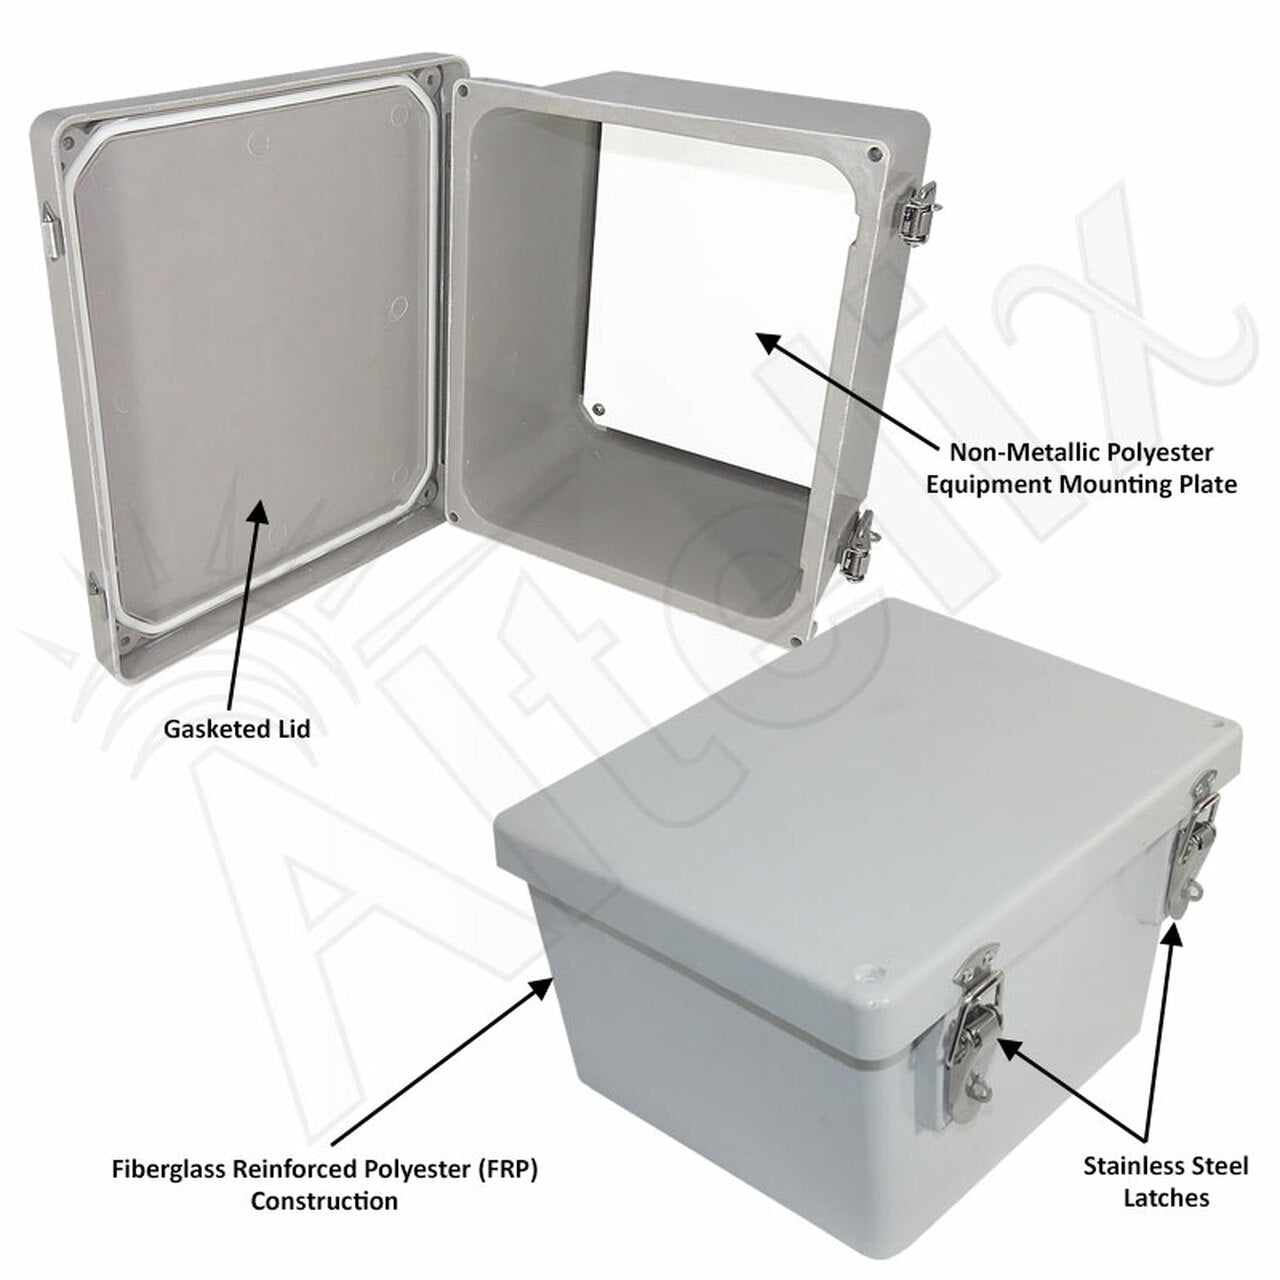 Altelix NEMA 4X Fiberglass Indoor / Outdoor RF Transparent WiFi Access Point Enclosure with Polyester Equipment Mounting Plate - 0